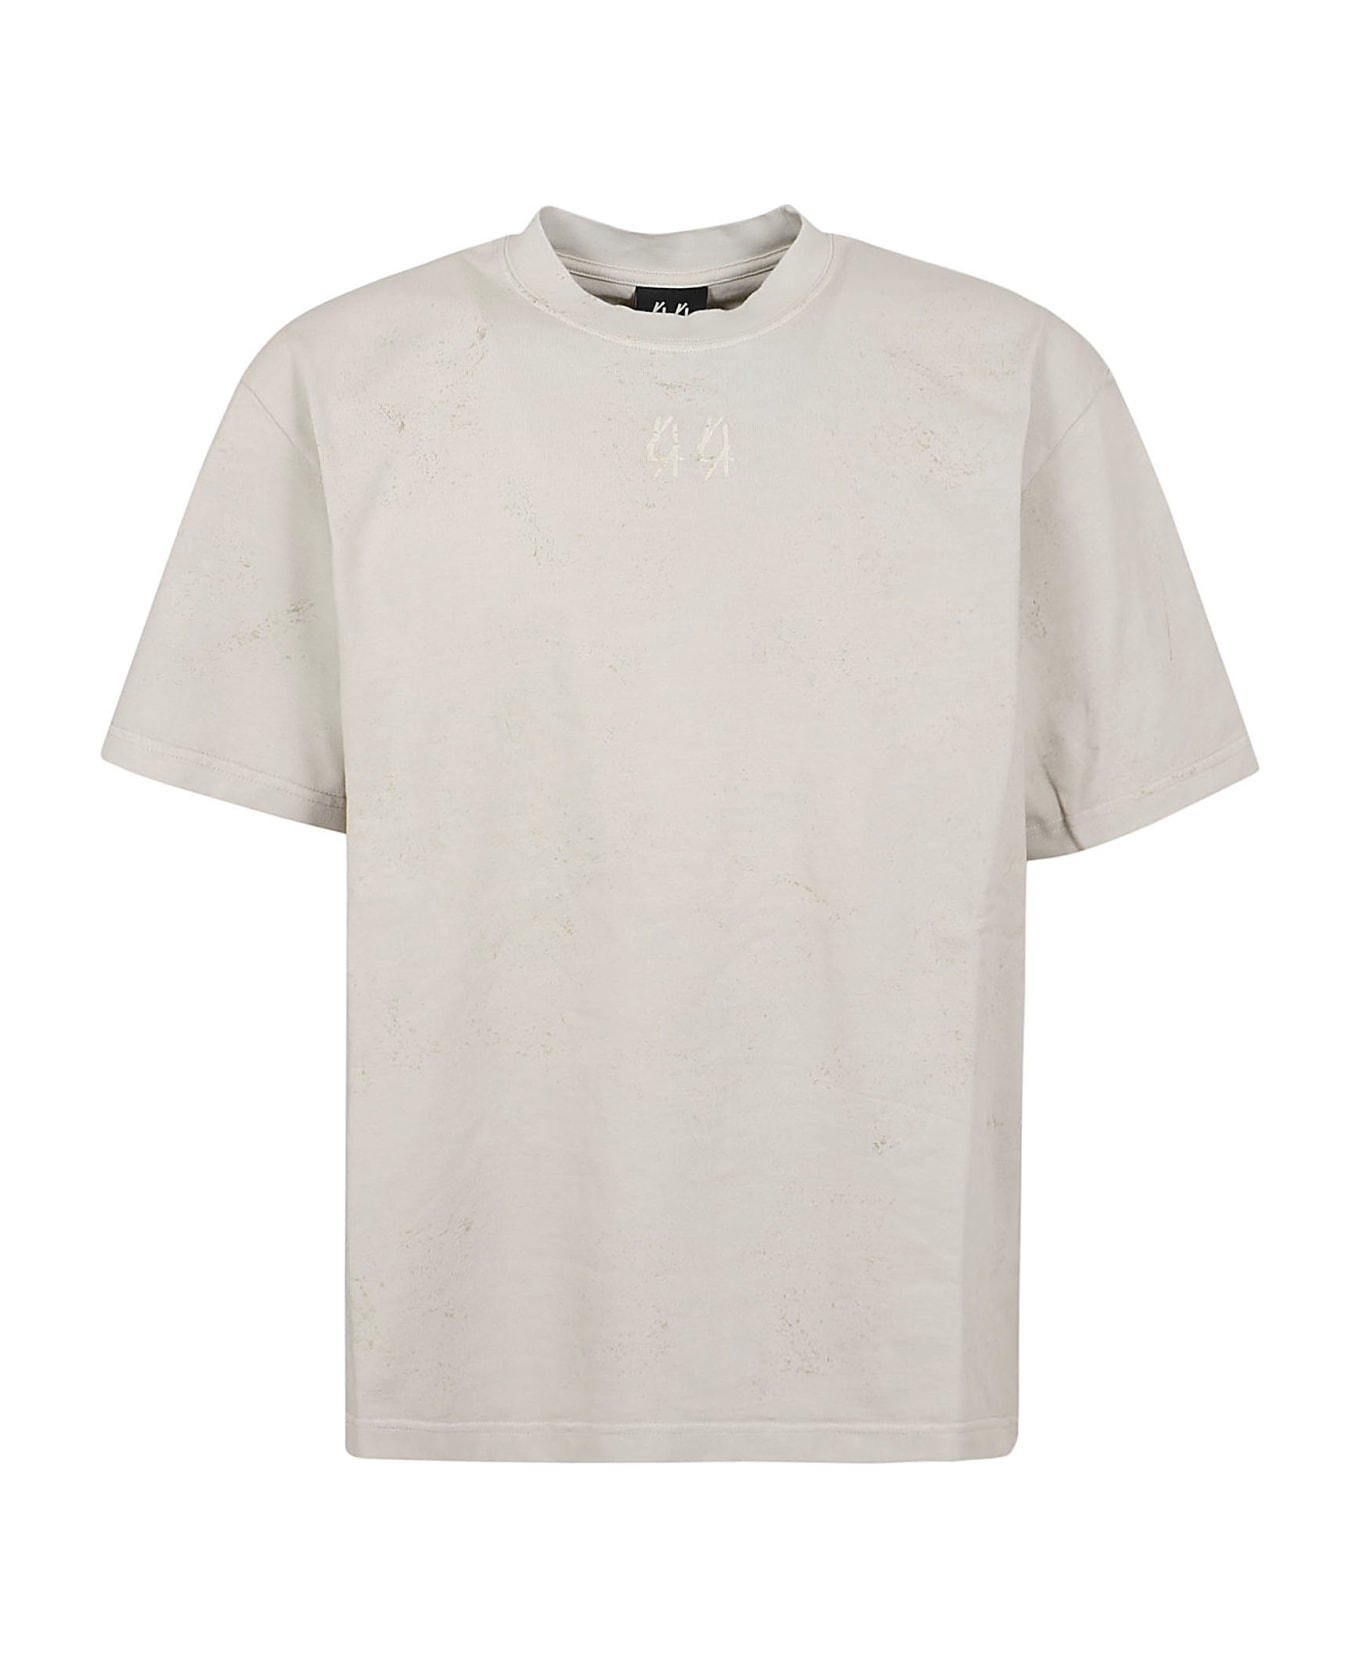 44 Label Group Trip Tee - Dirty White Gyps